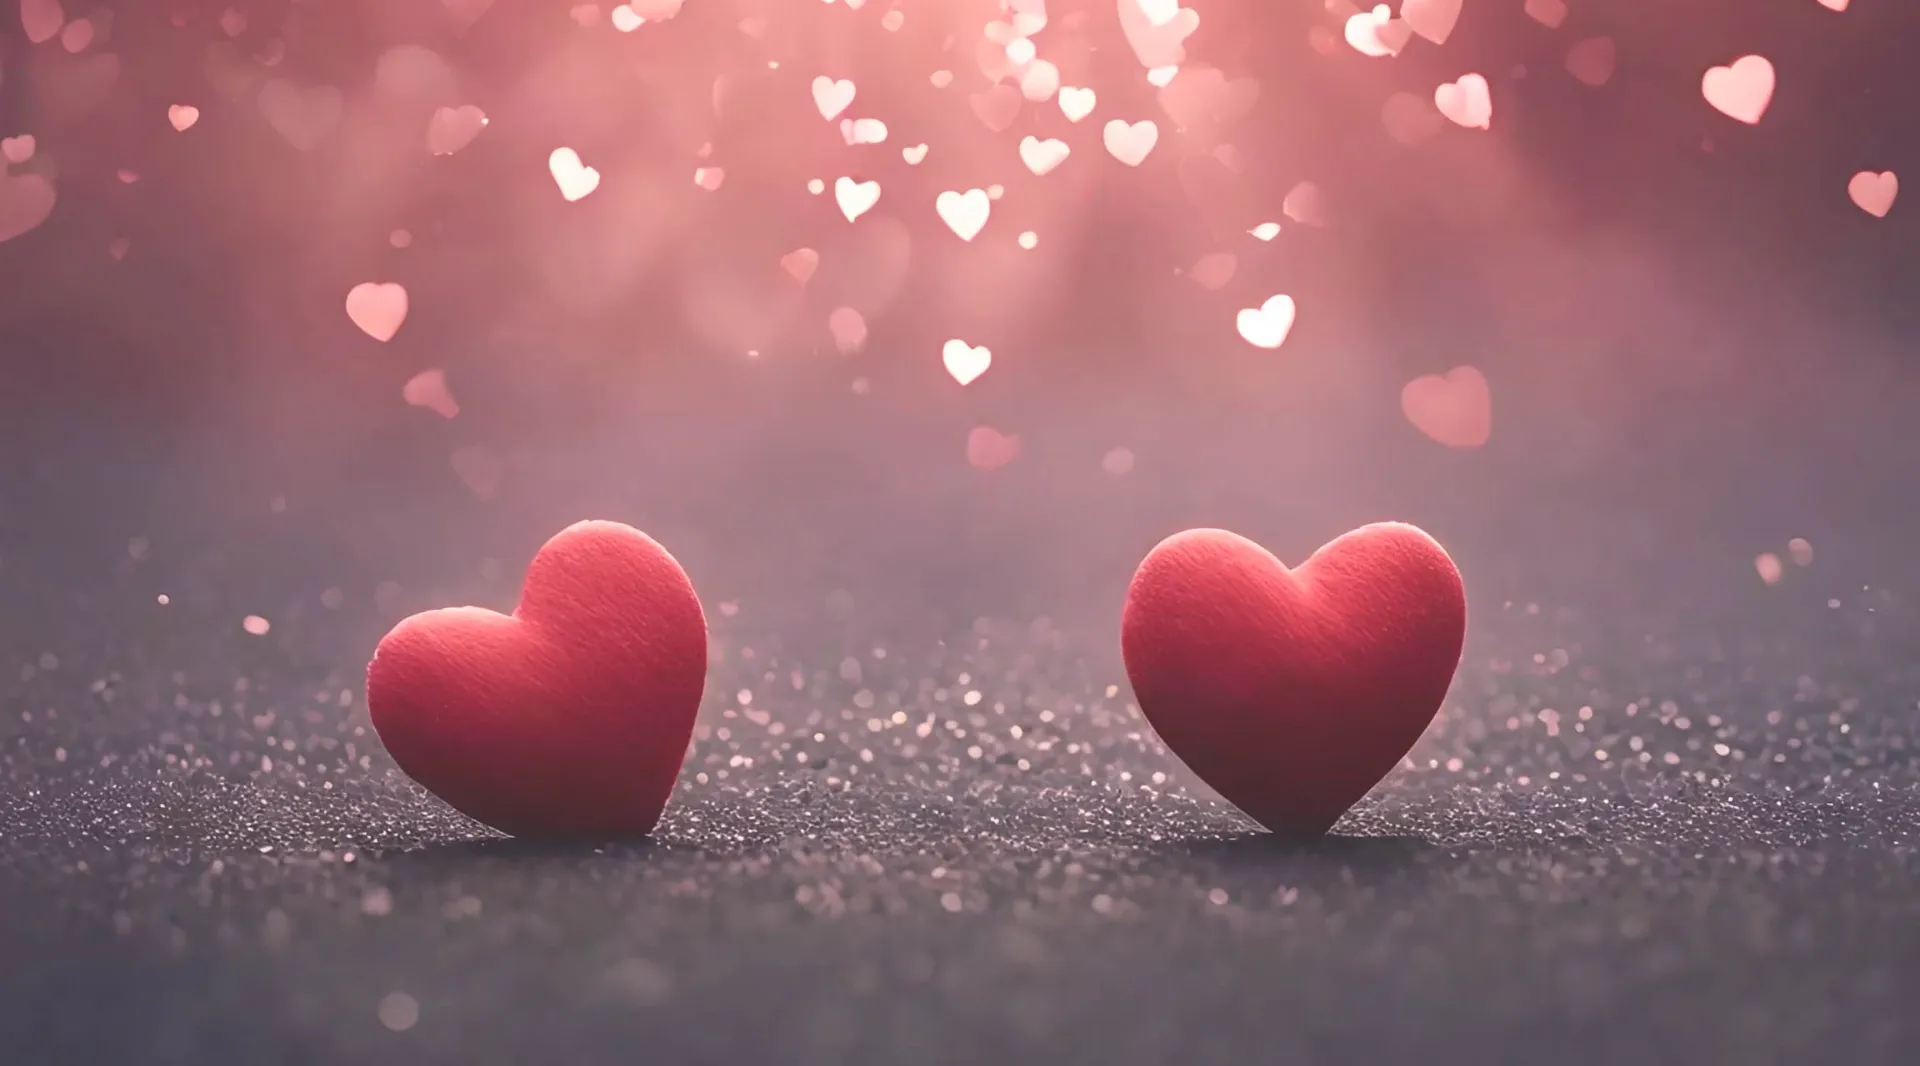 Cherished Dreams Soft Heart Background